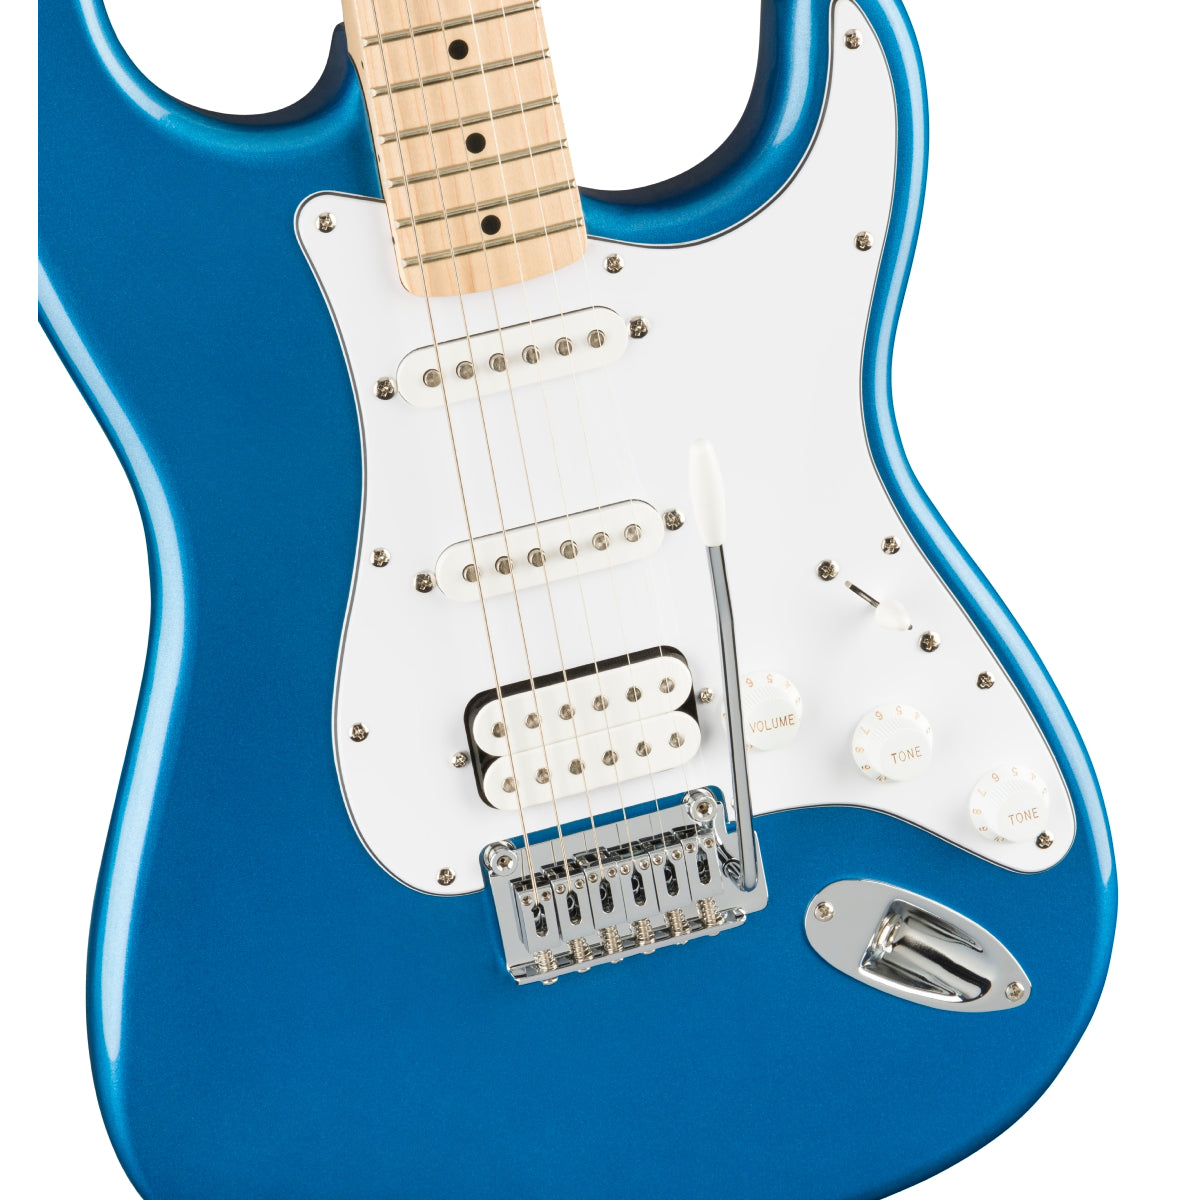 Squier Affinity Series Stratocaster HSS Pack, Maple Fingerboard, Lake Placid Blue - Việt Music